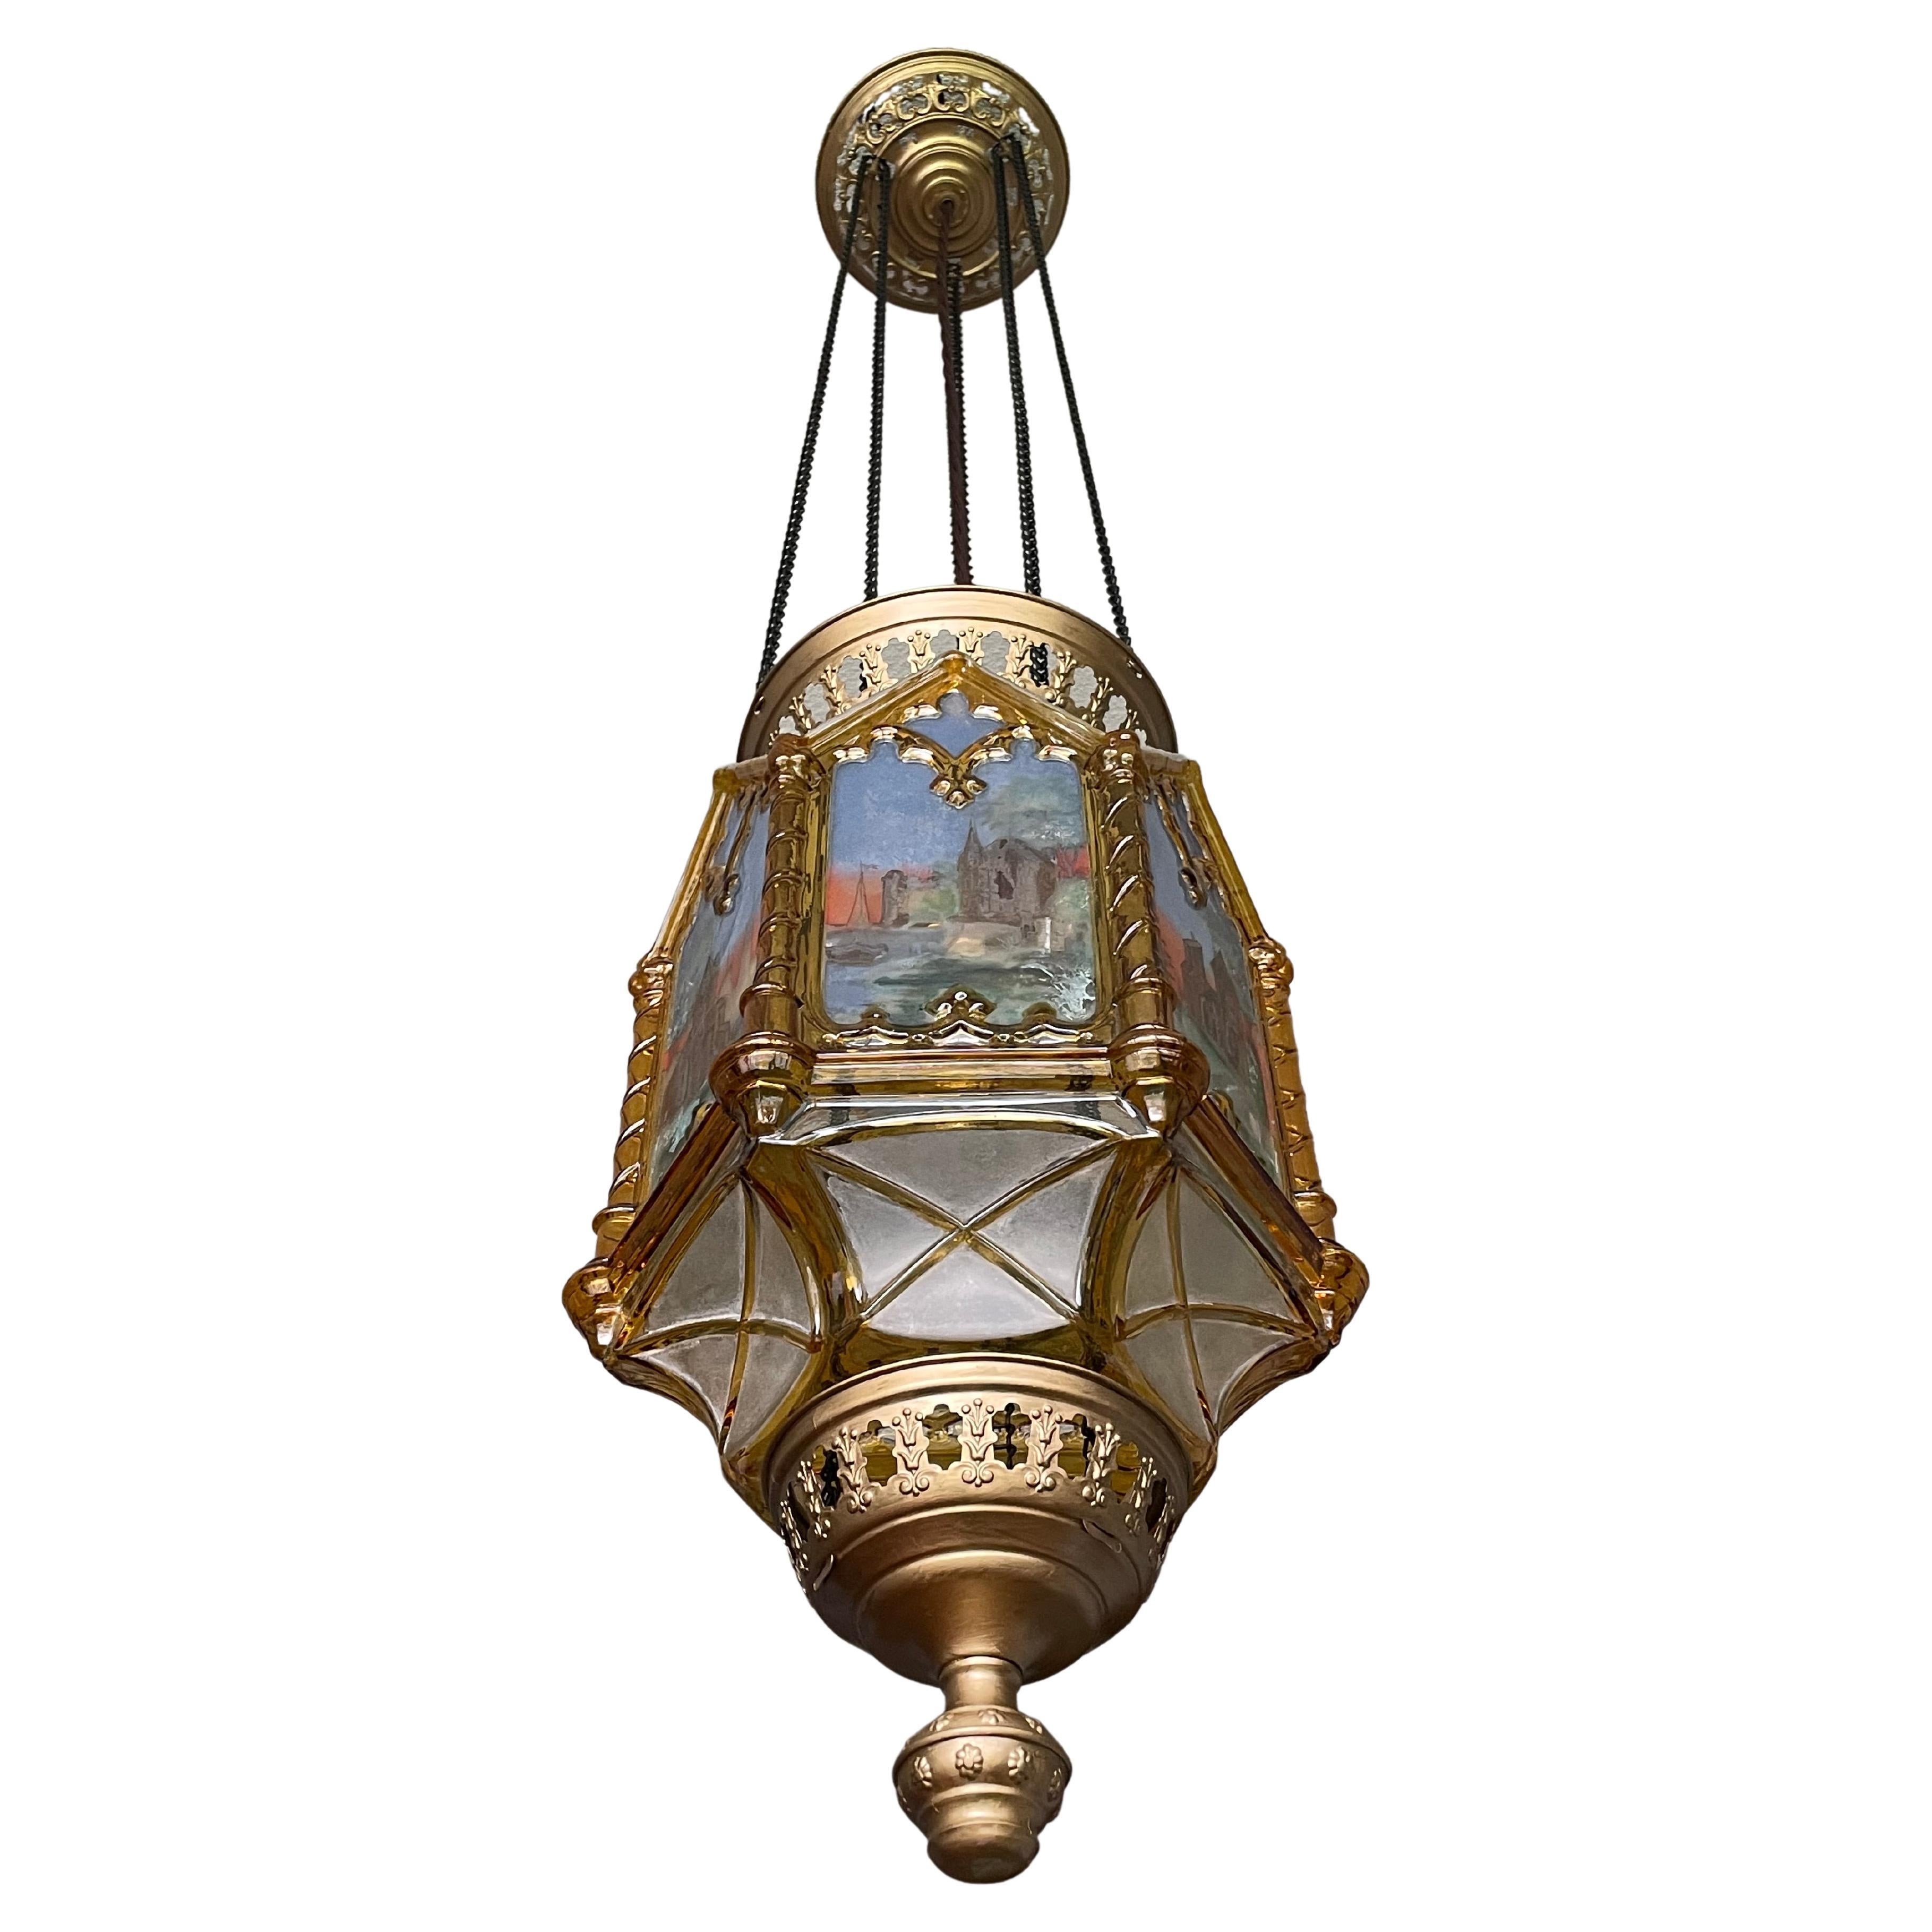 Truly impressive and all handcrafted, hexagonal Gothic light fixture.

If you are a collector of truly amazing Gothic antiques then this good size and probably one of a kind pendant could be flying your way soon. With antique light fixtures as one